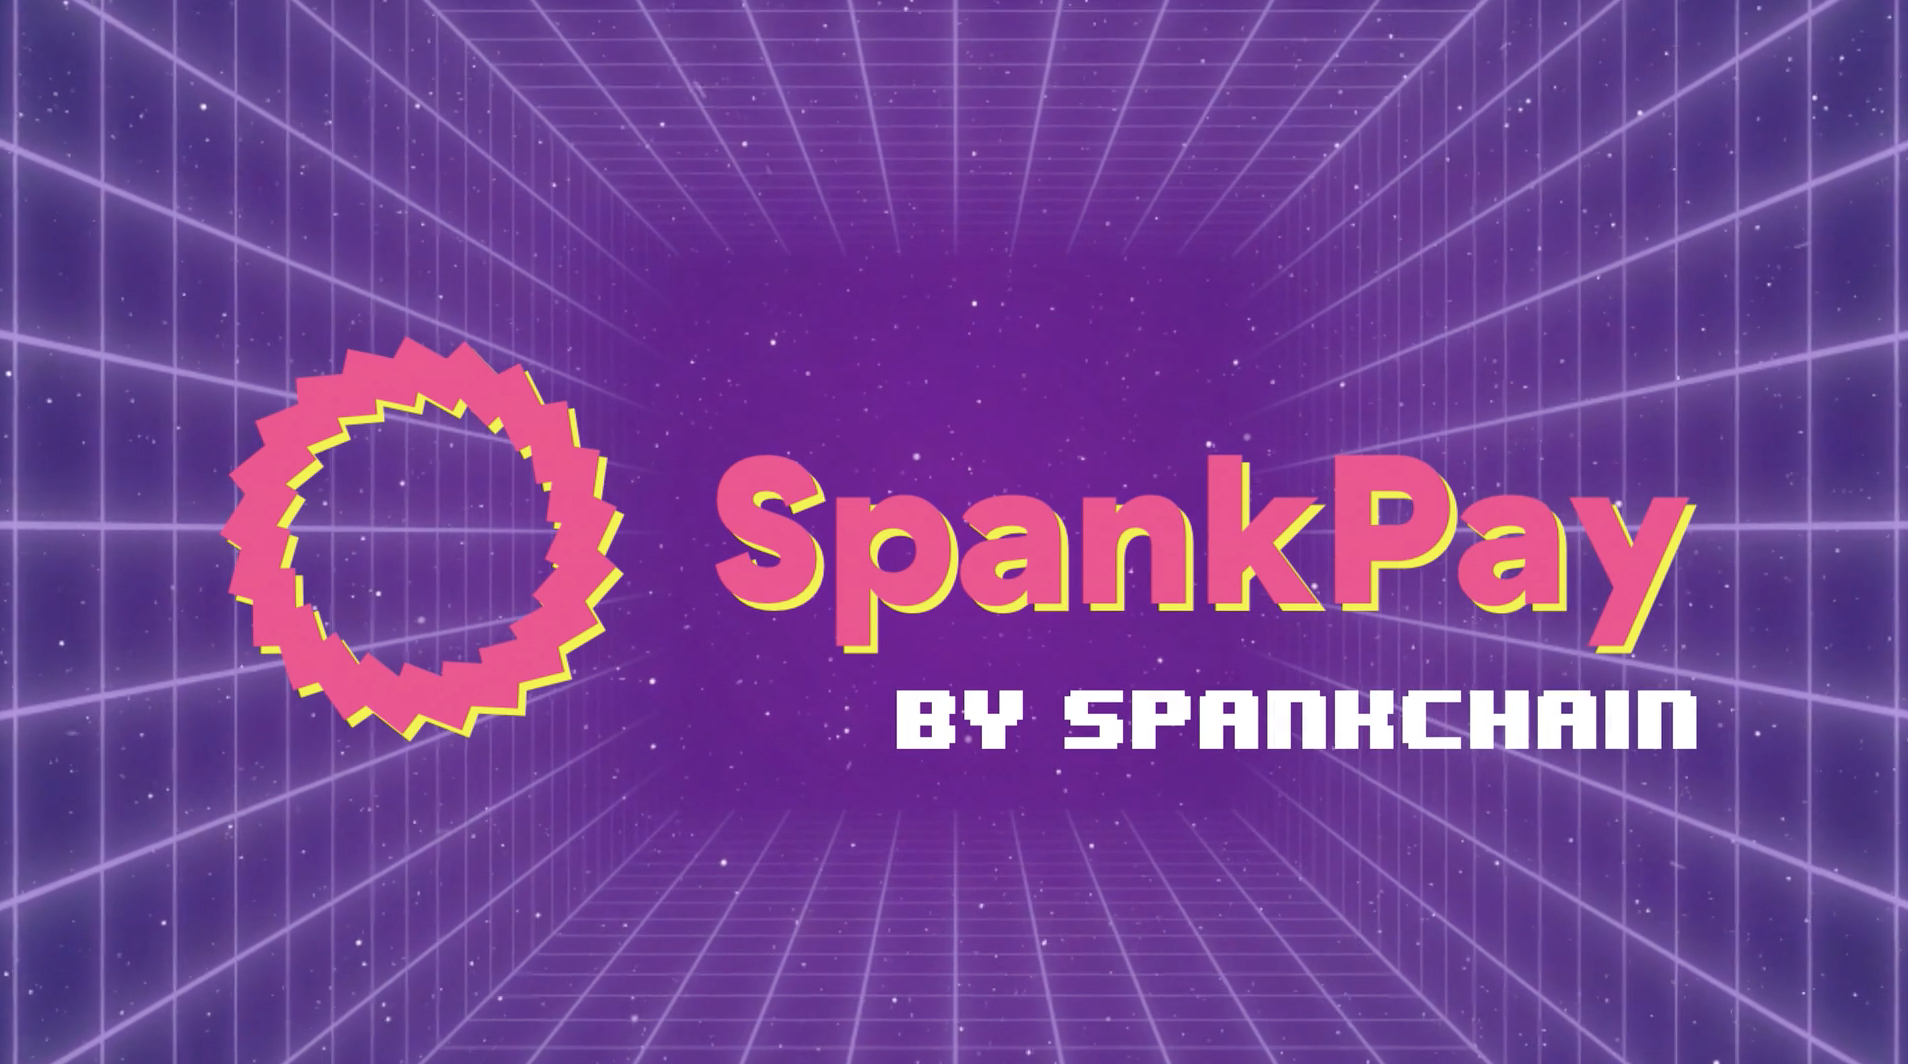 SpankPayVideoGraphic1.png